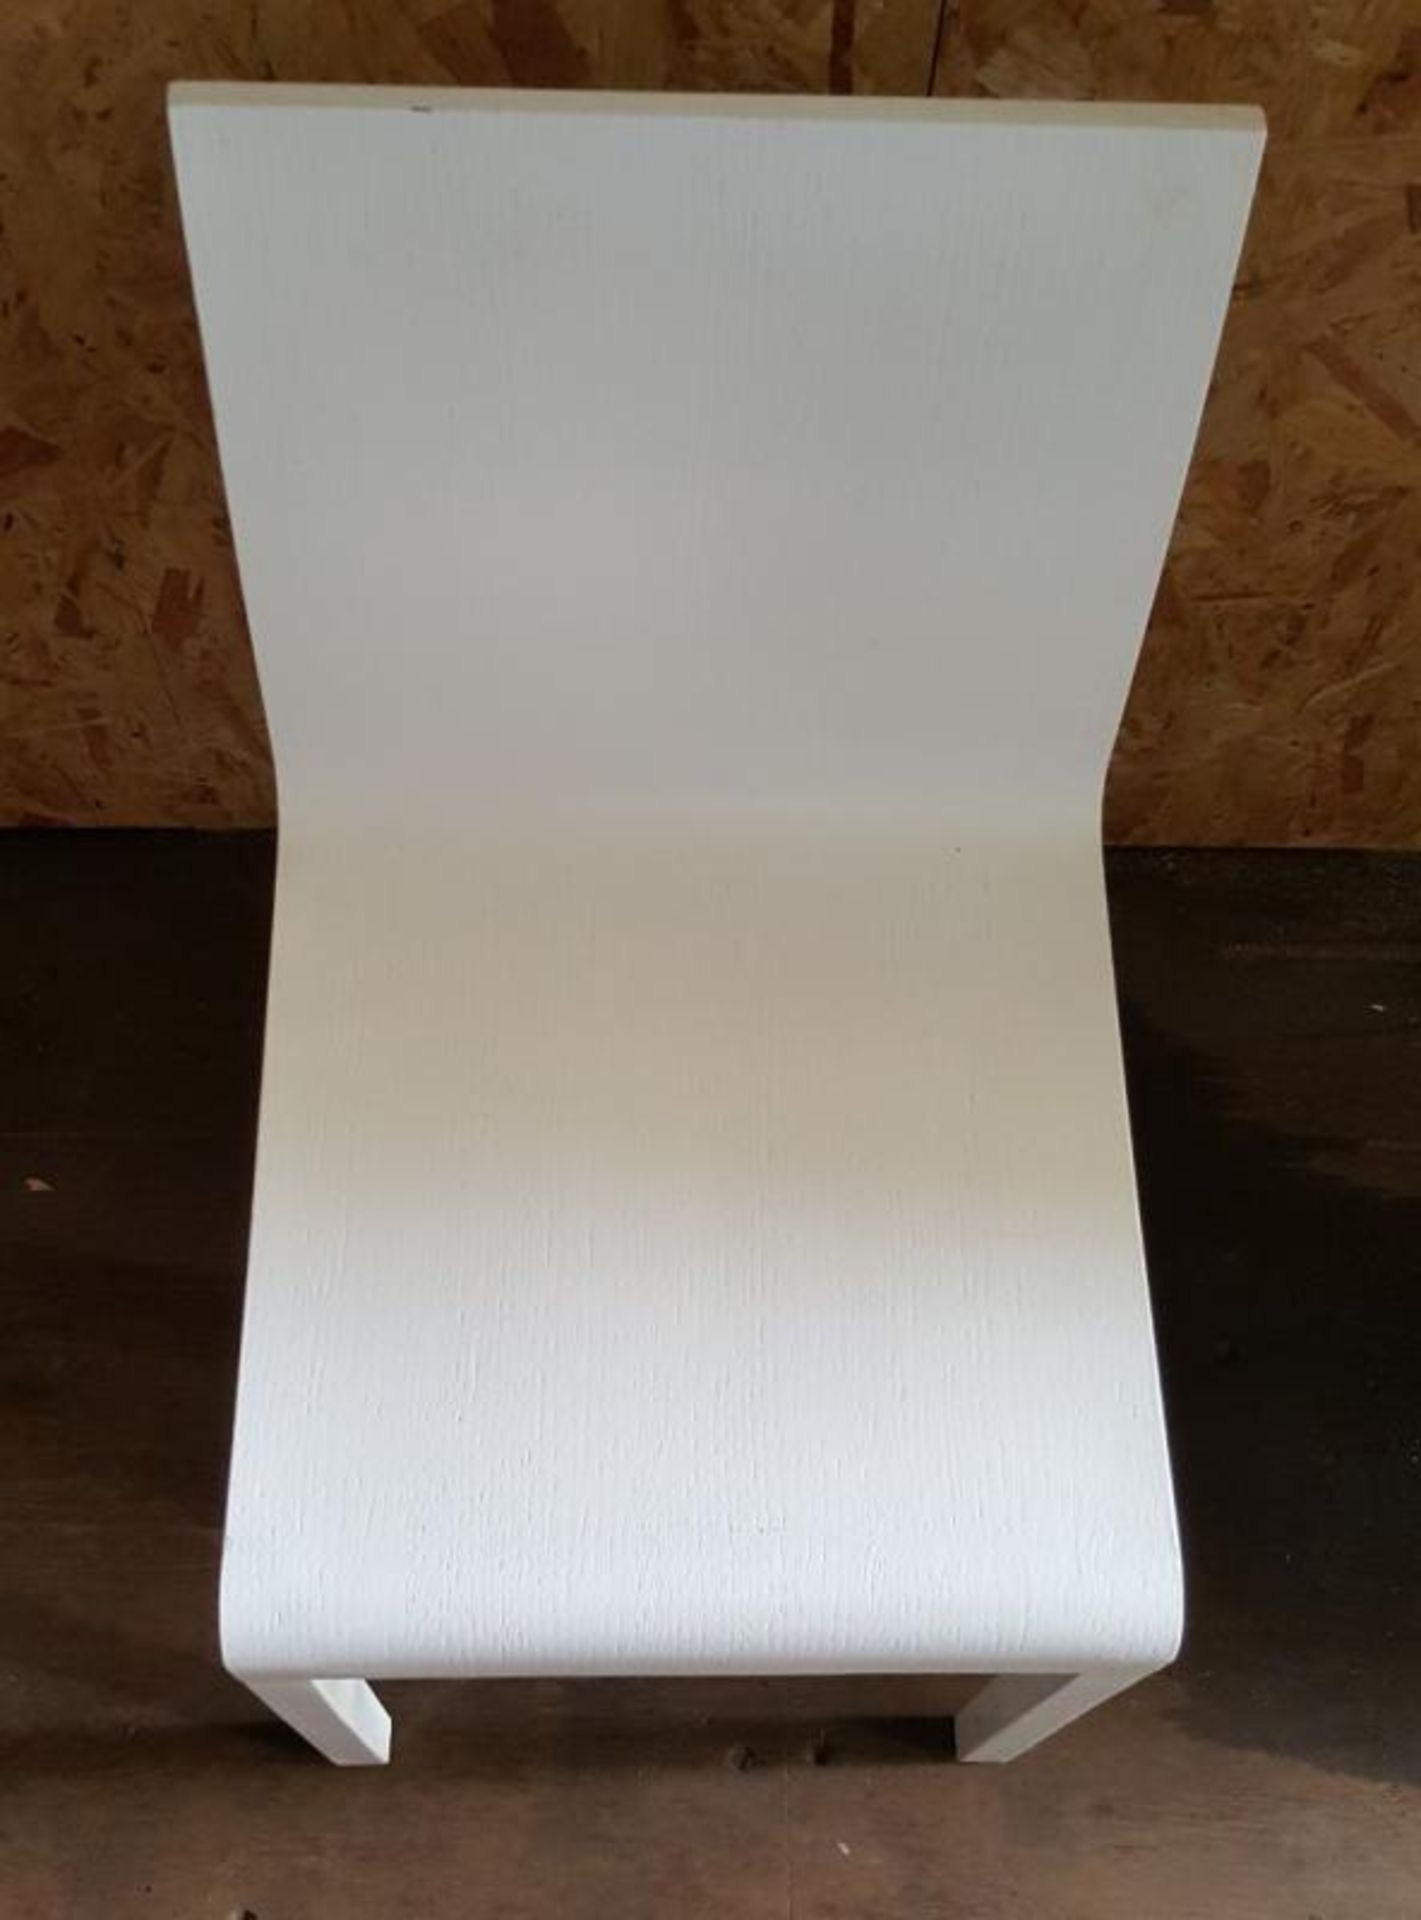 4 x Wooden Dining Chairs Set With A Bright White Finish - Dimensions: Used, In Good Condition - Ref - Image 2 of 6